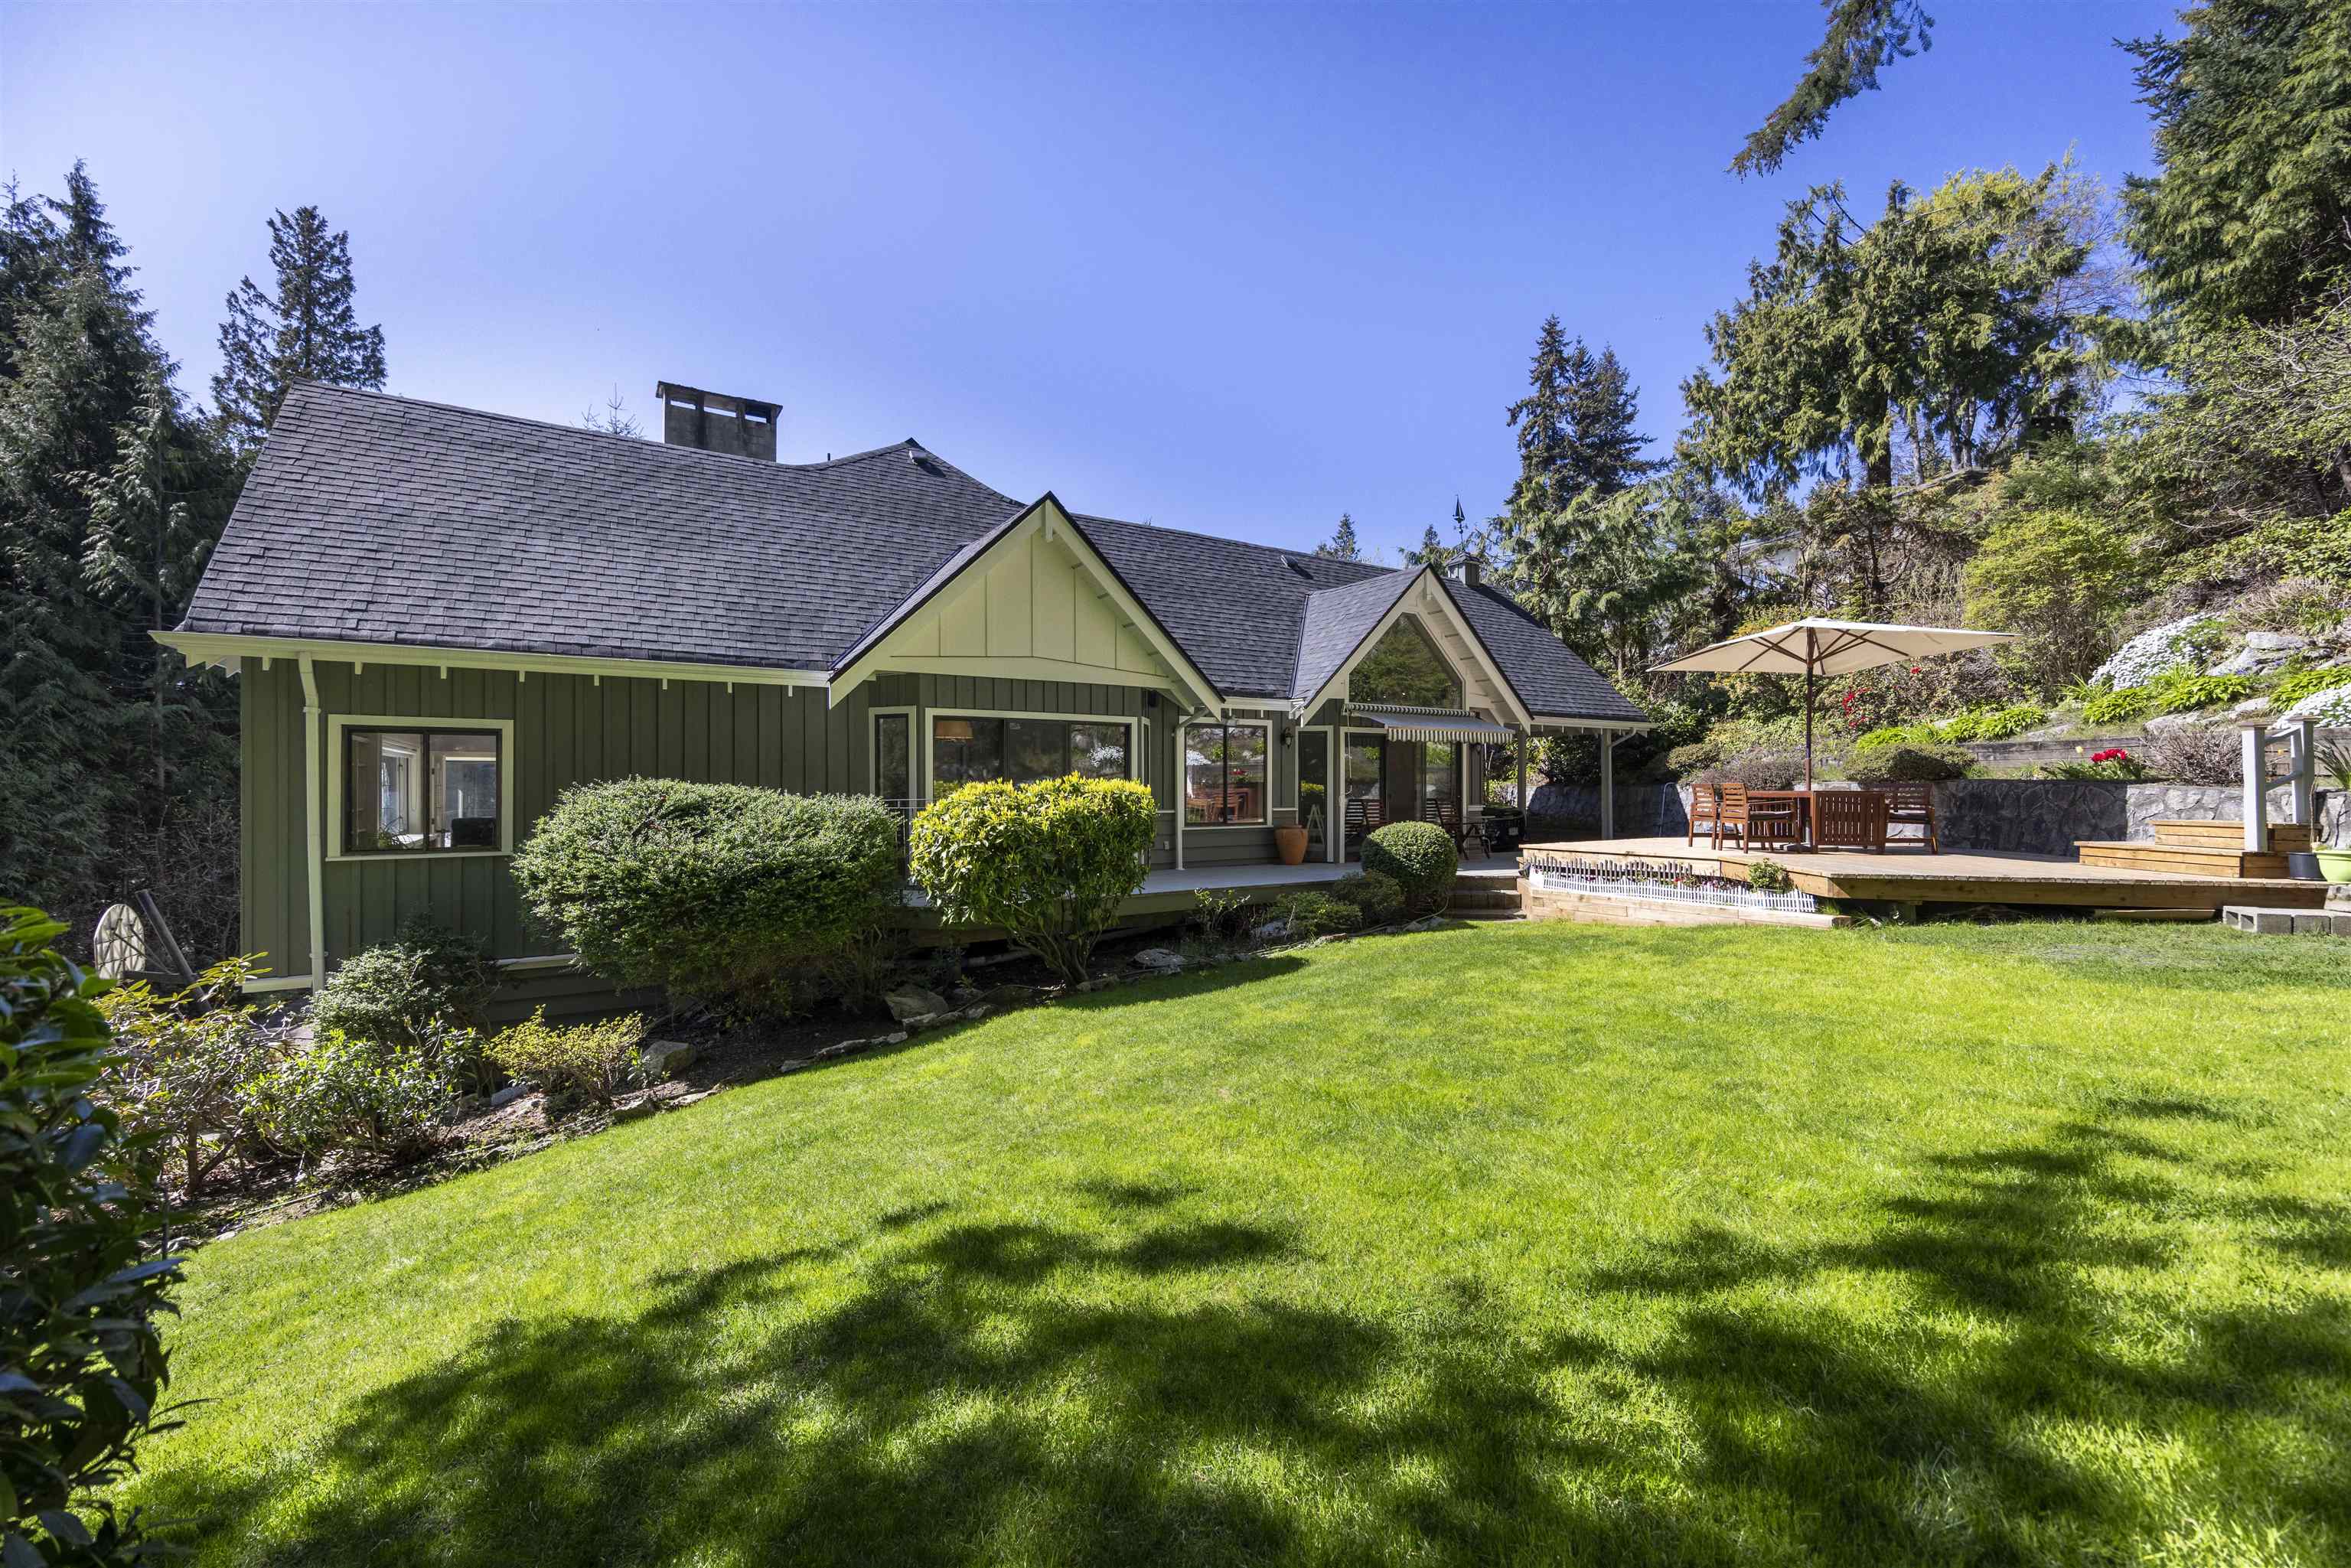 Listing image of 4660 WILLOW CREEK ROAD